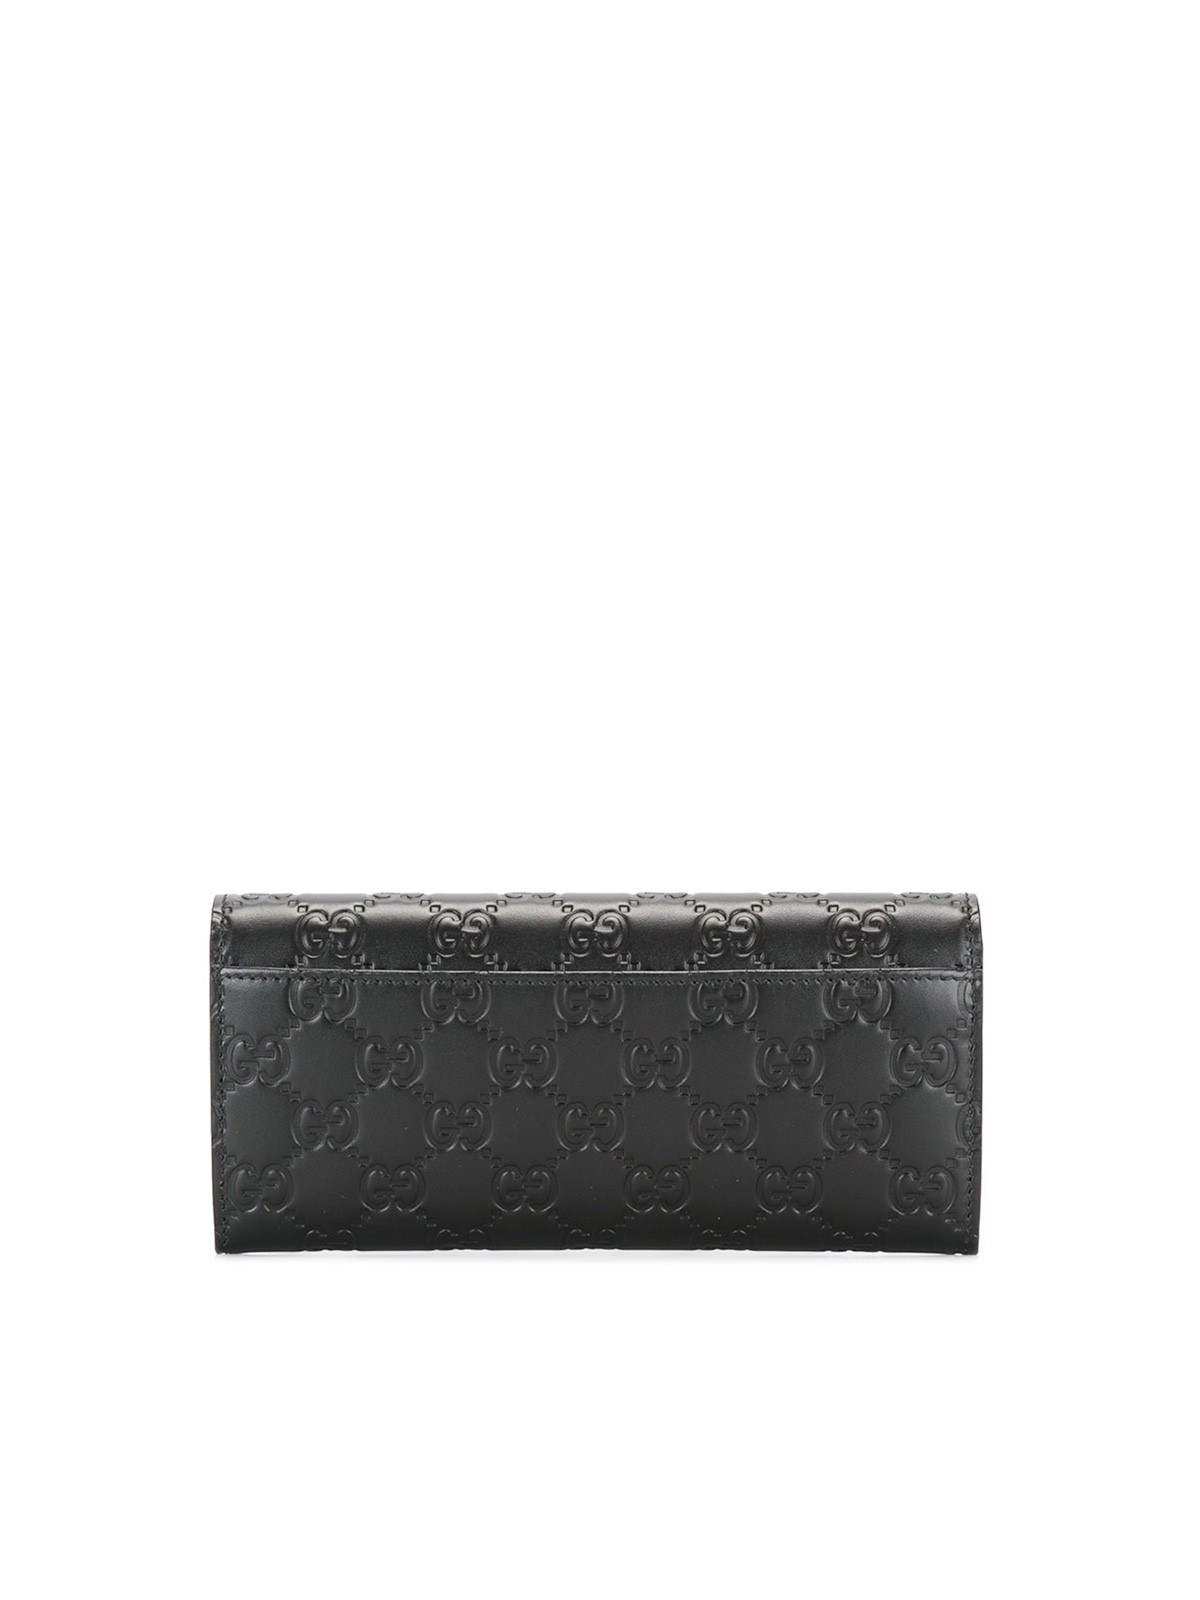 gucci GG WALLET available on montiboutique.com - 21676